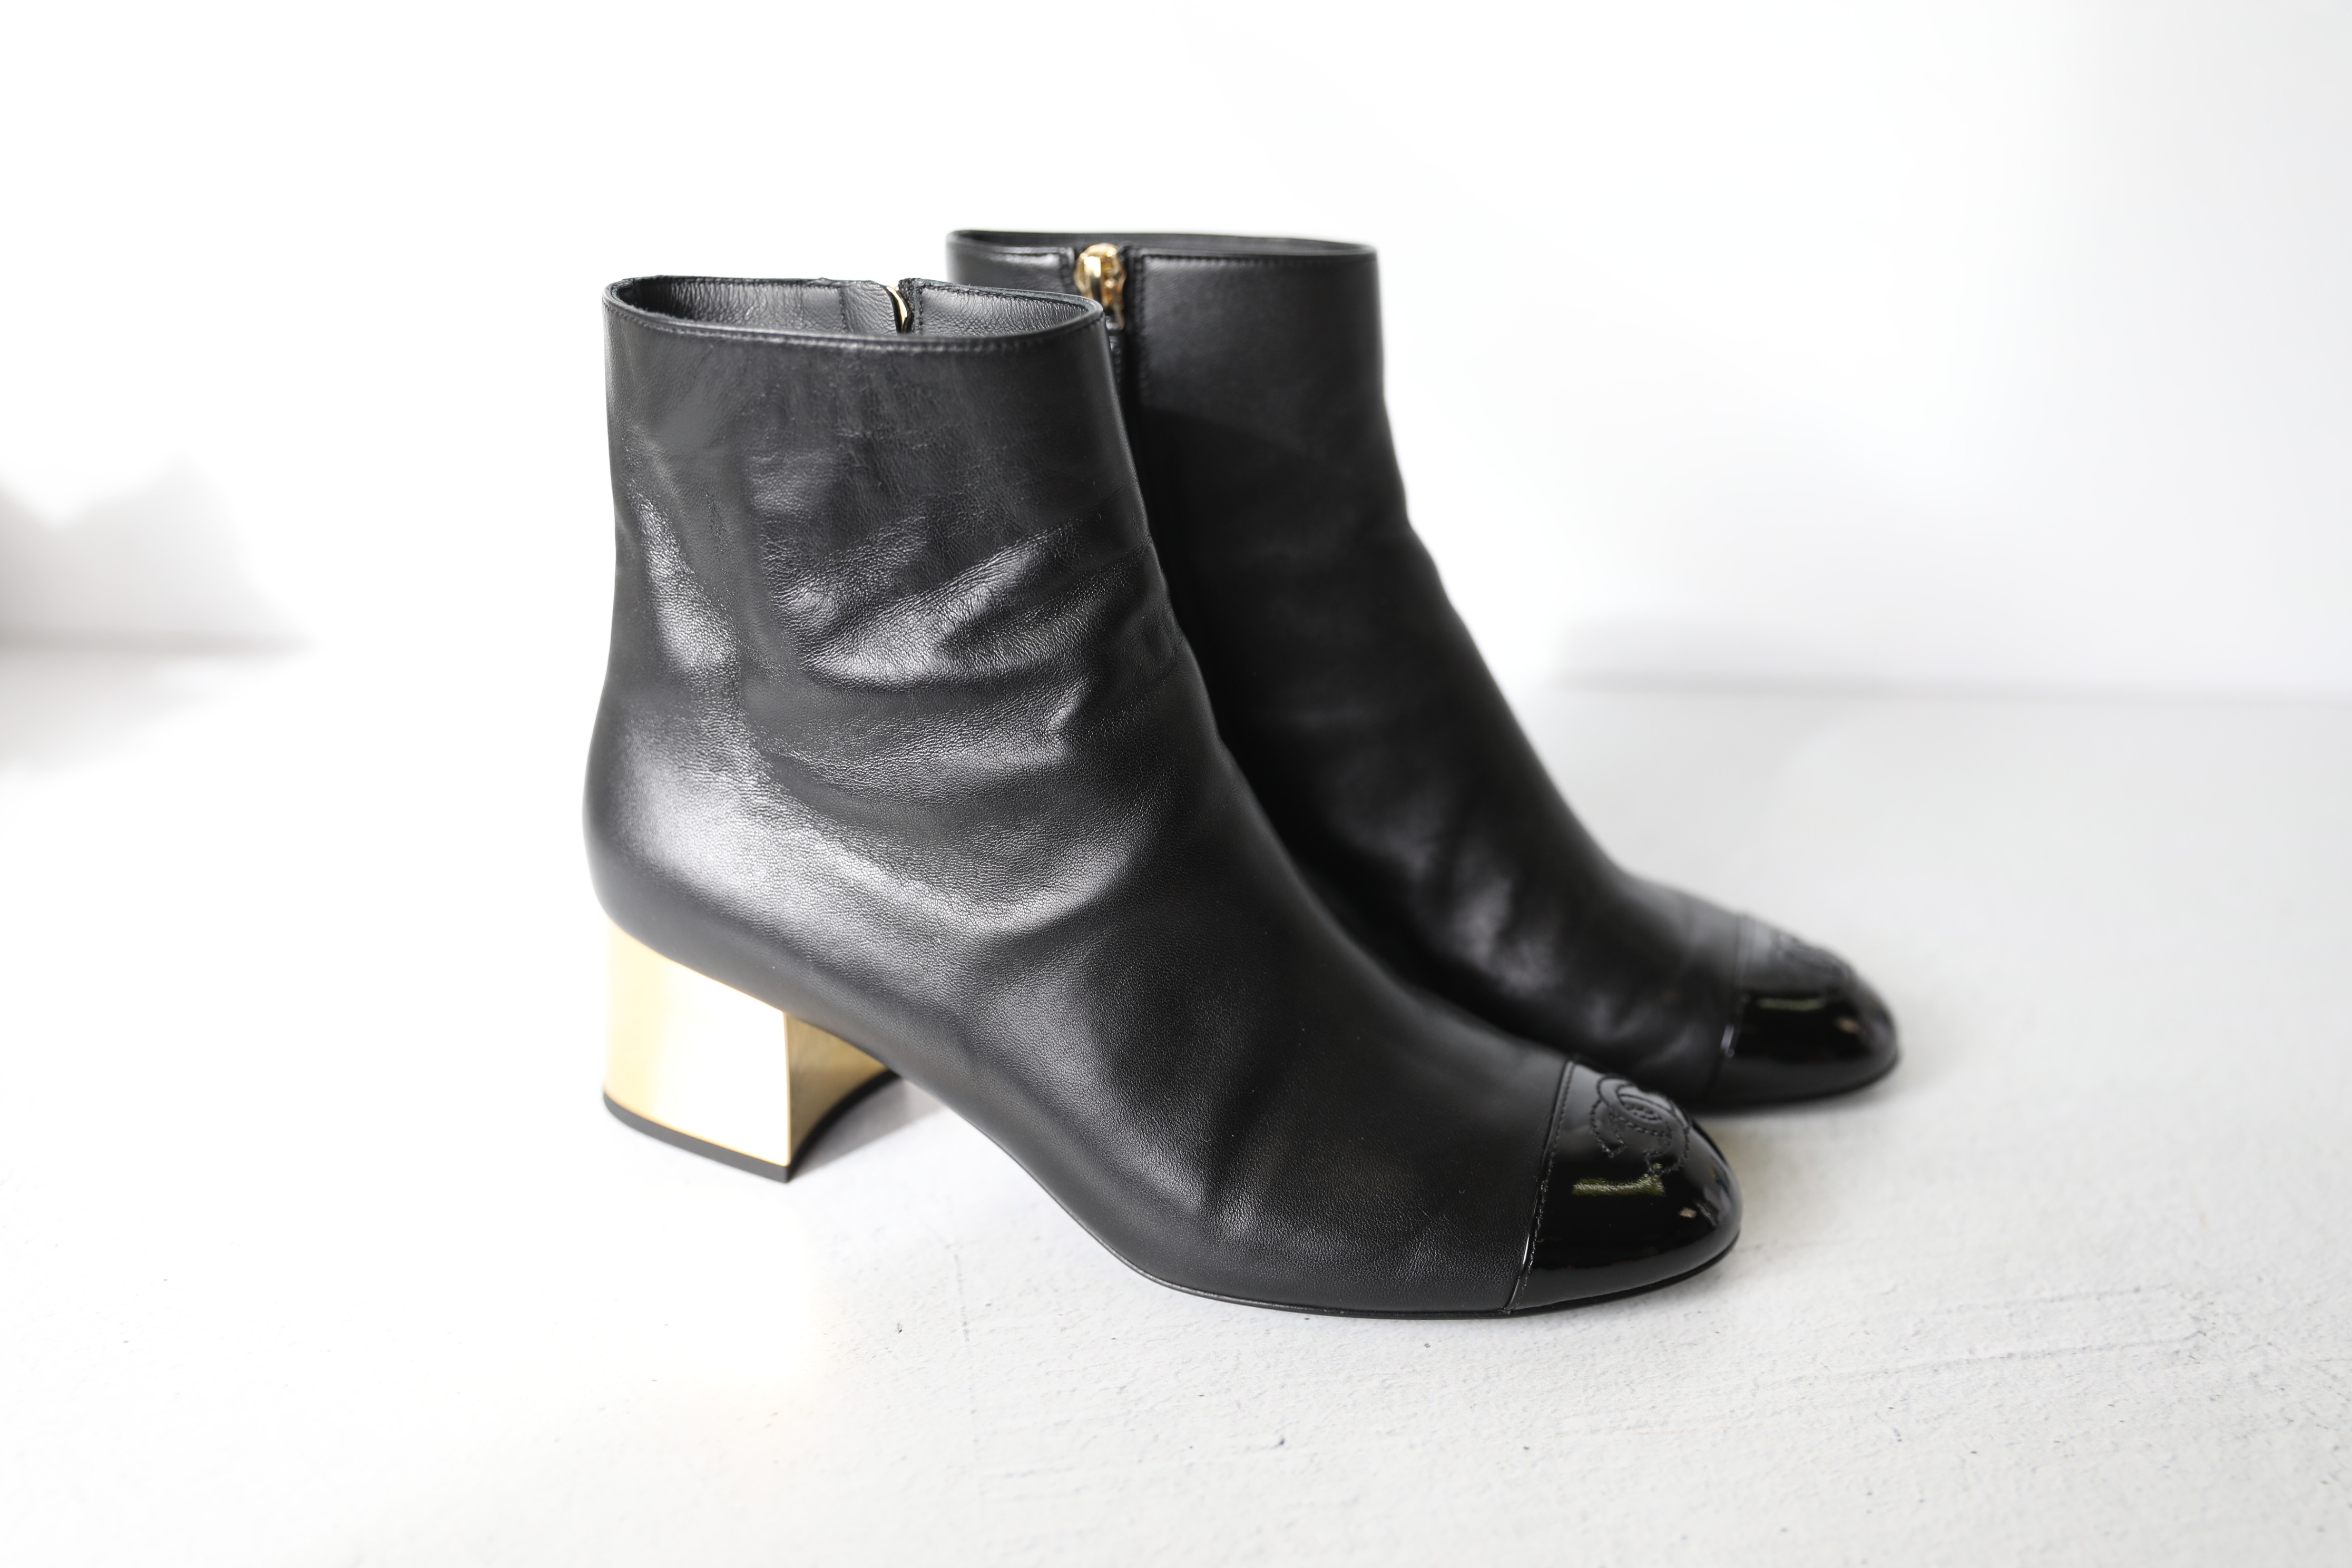 Chanel Shoes Ankle Boots with Pearl Heel, Black, Size 36, New in Box WA001  - Julia Rose Boston